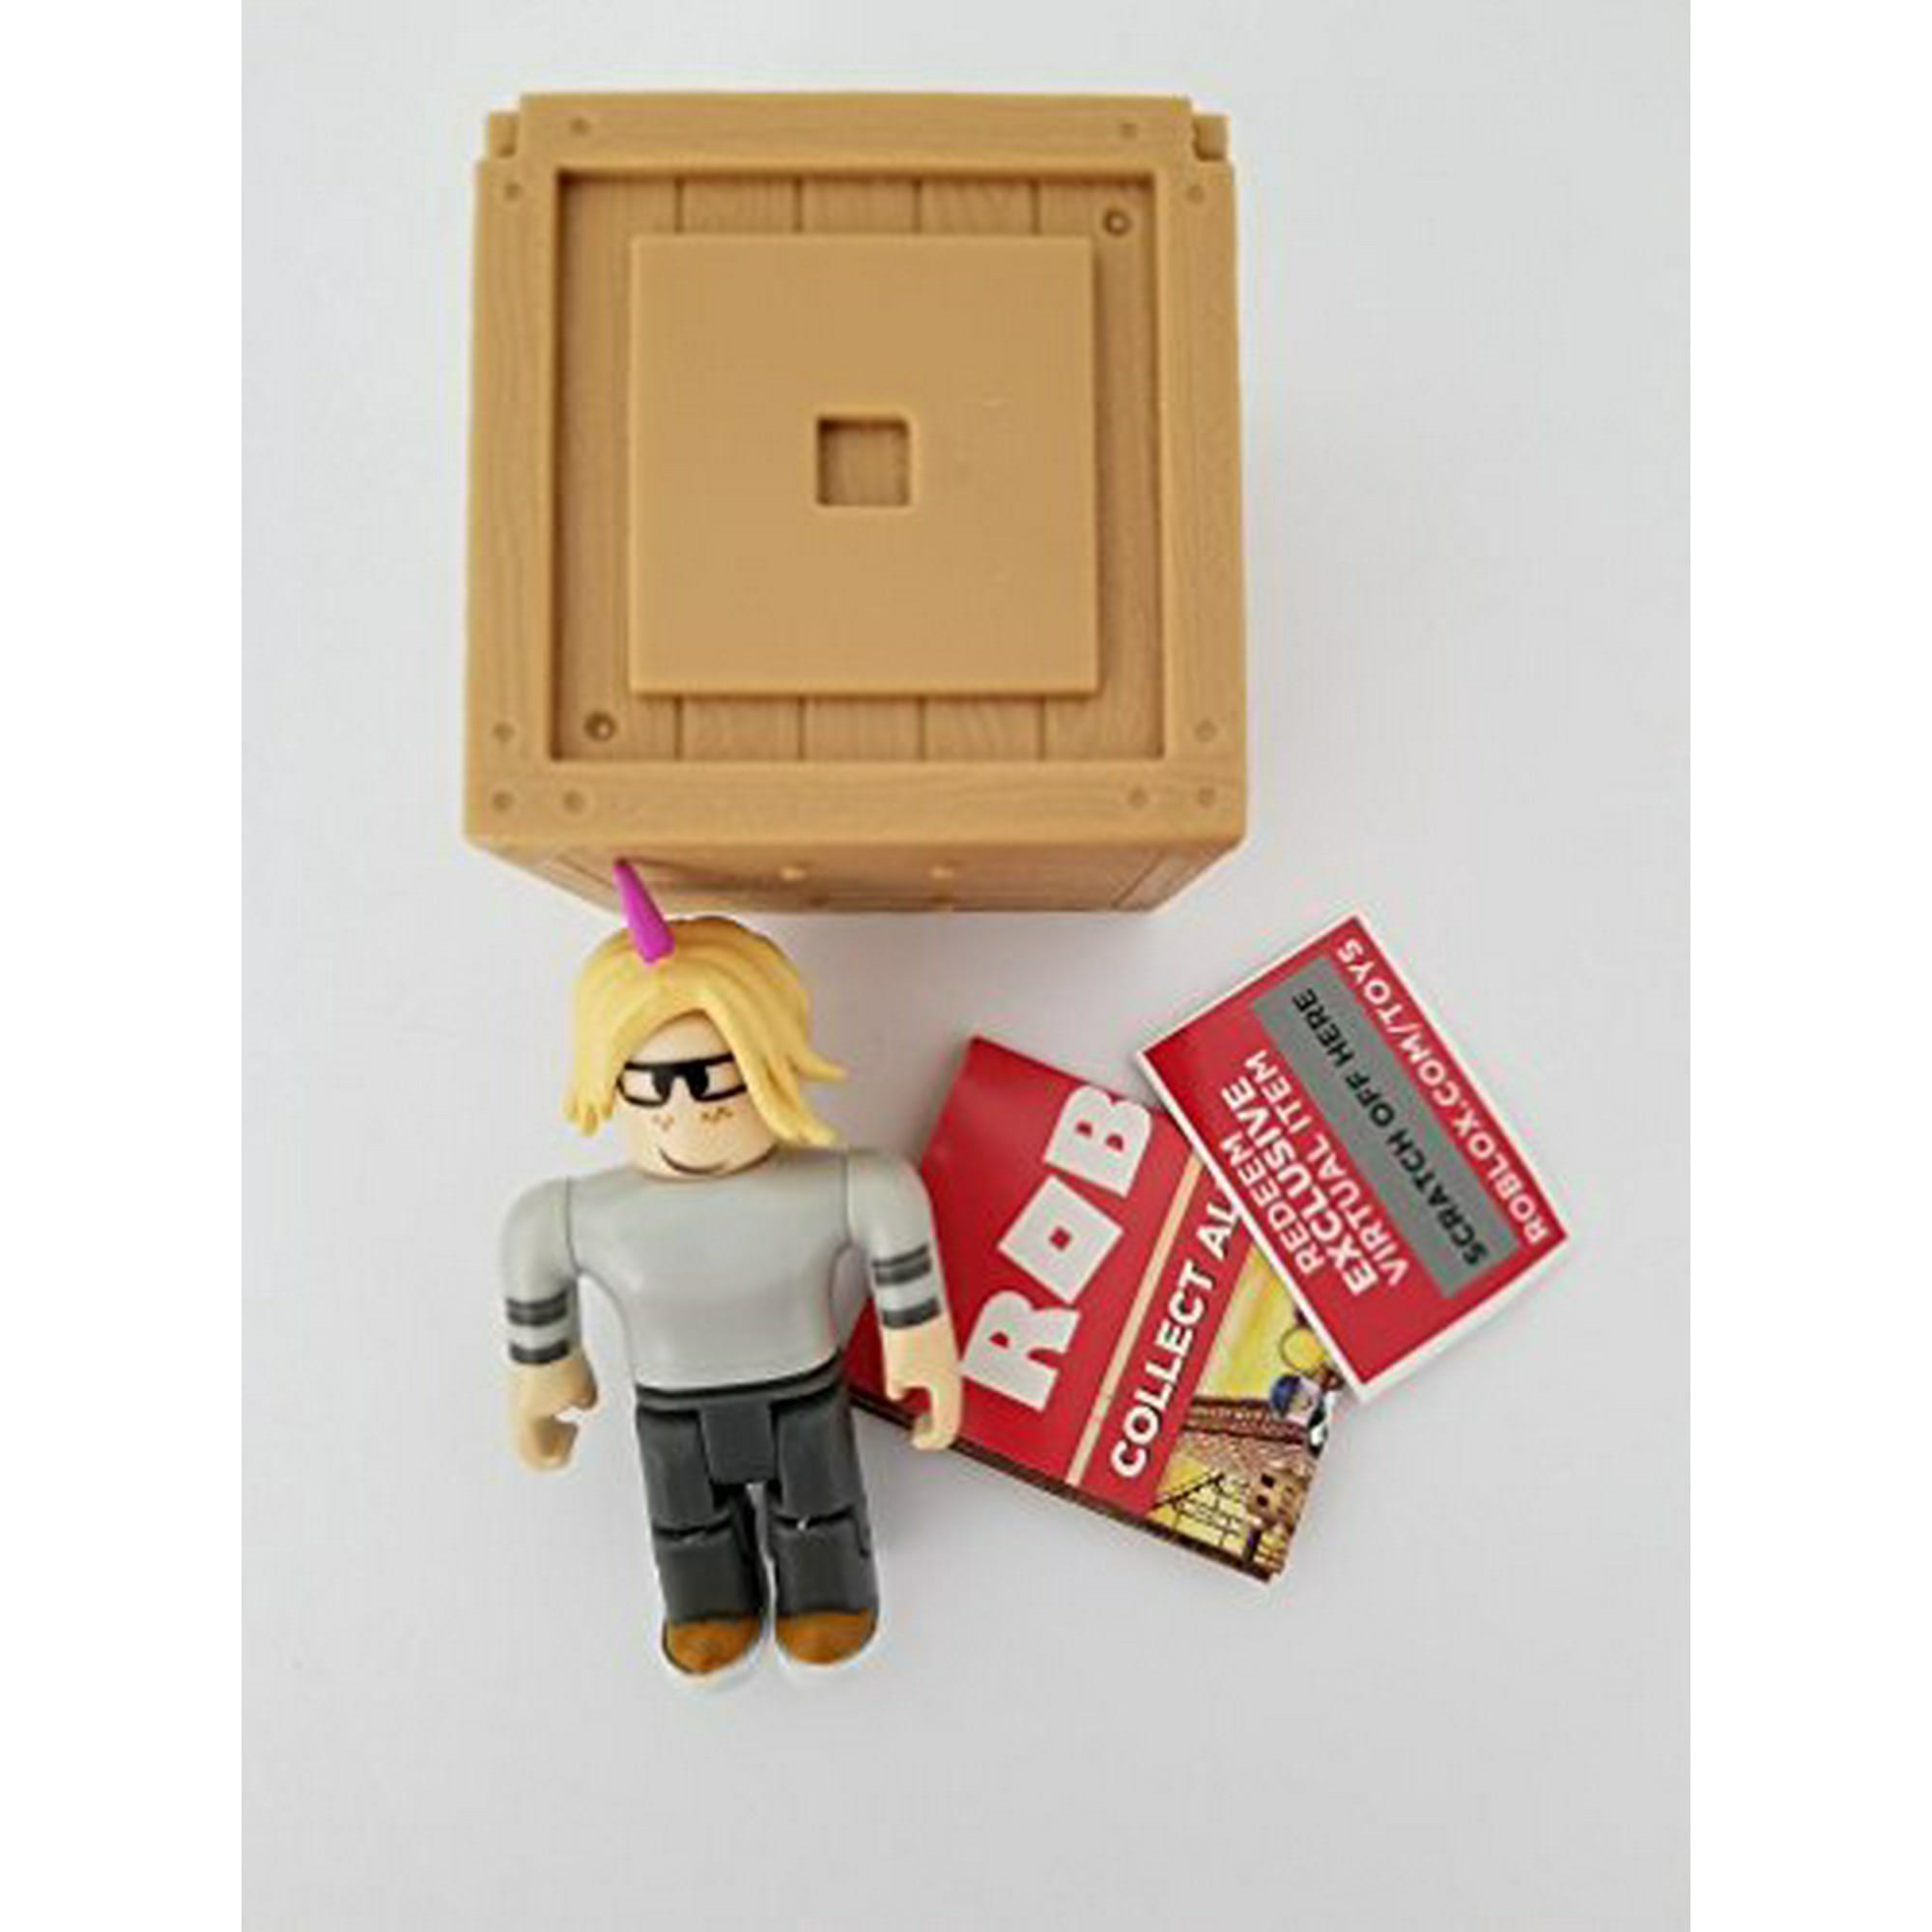 Roblox Series 2 Reesemcblox Action Figure Mystery Box Virtual Item Code 2 5 Walmart Canada - roblox series 2 mystery figures styles may vary